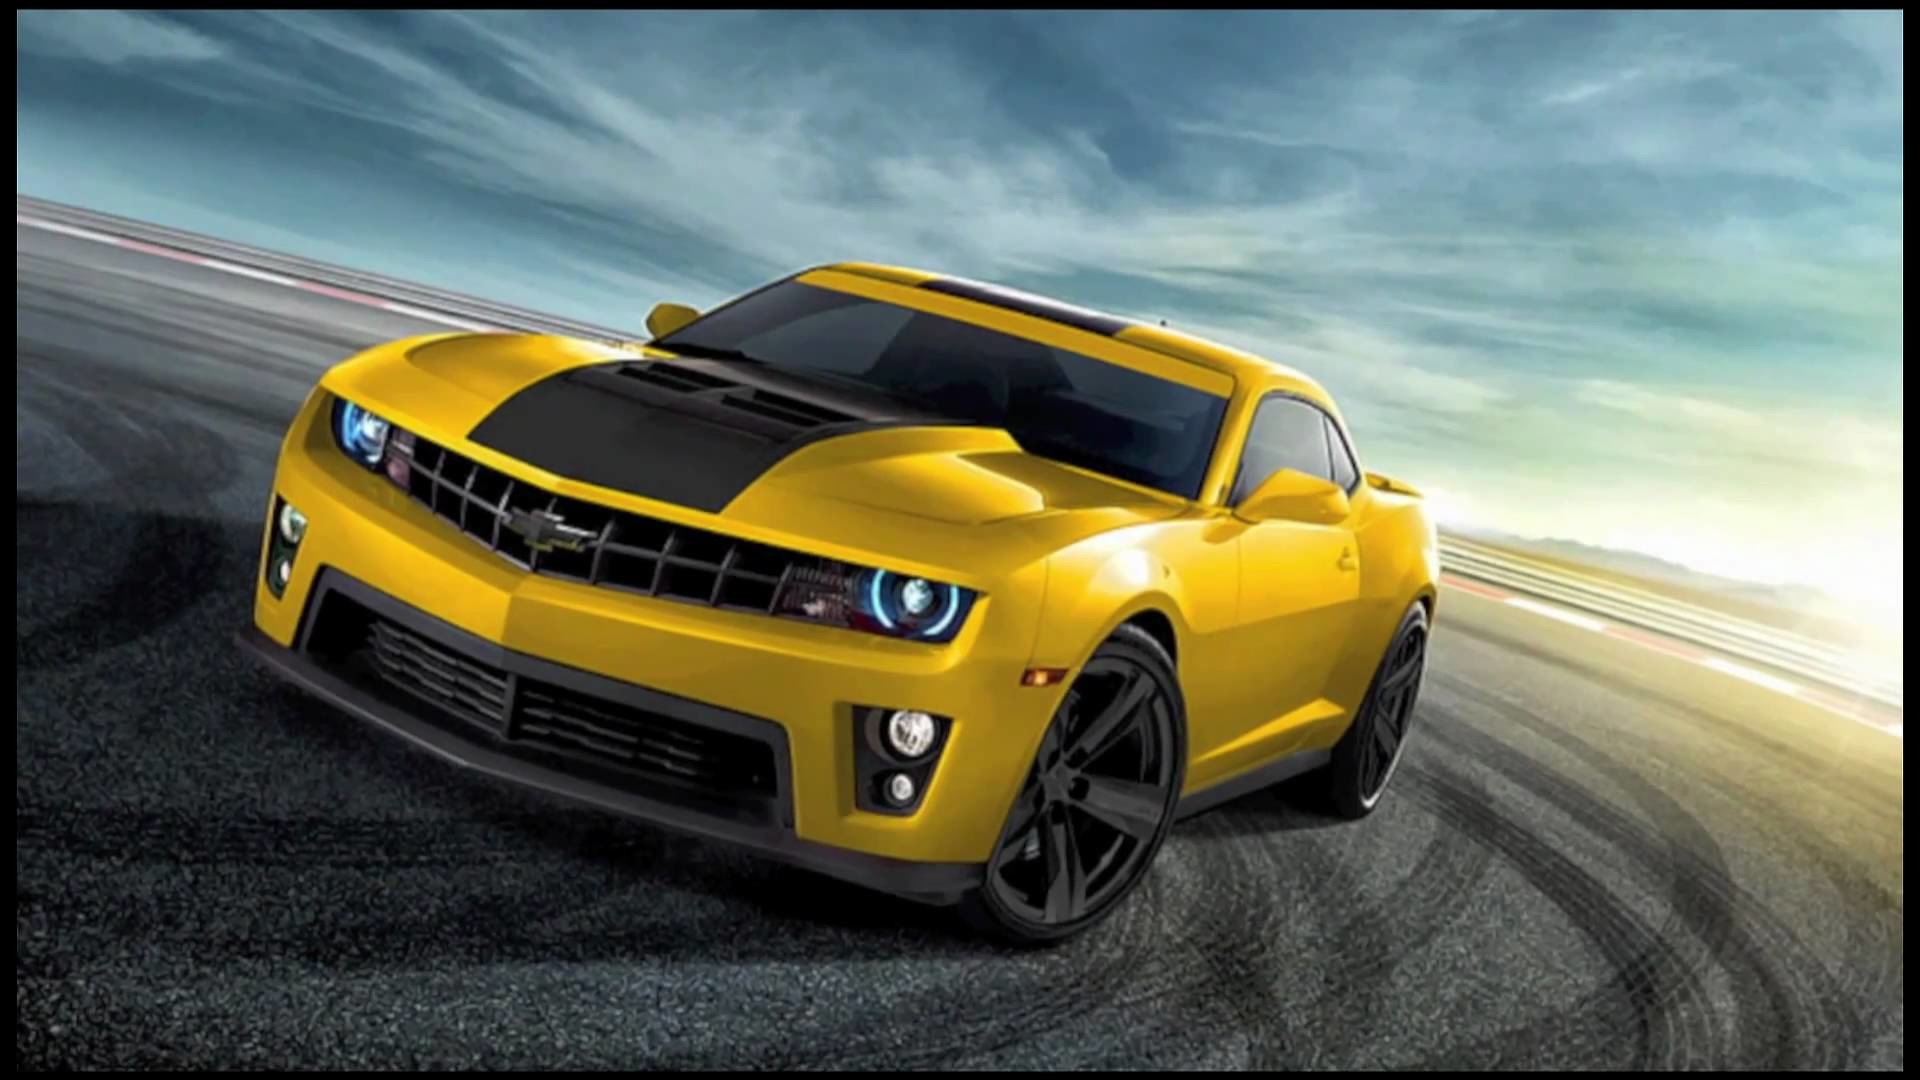 1920x1080 Chevy Camaro ZL1 Full hd wallpapers Chevy Camaro ZL1 For mobile